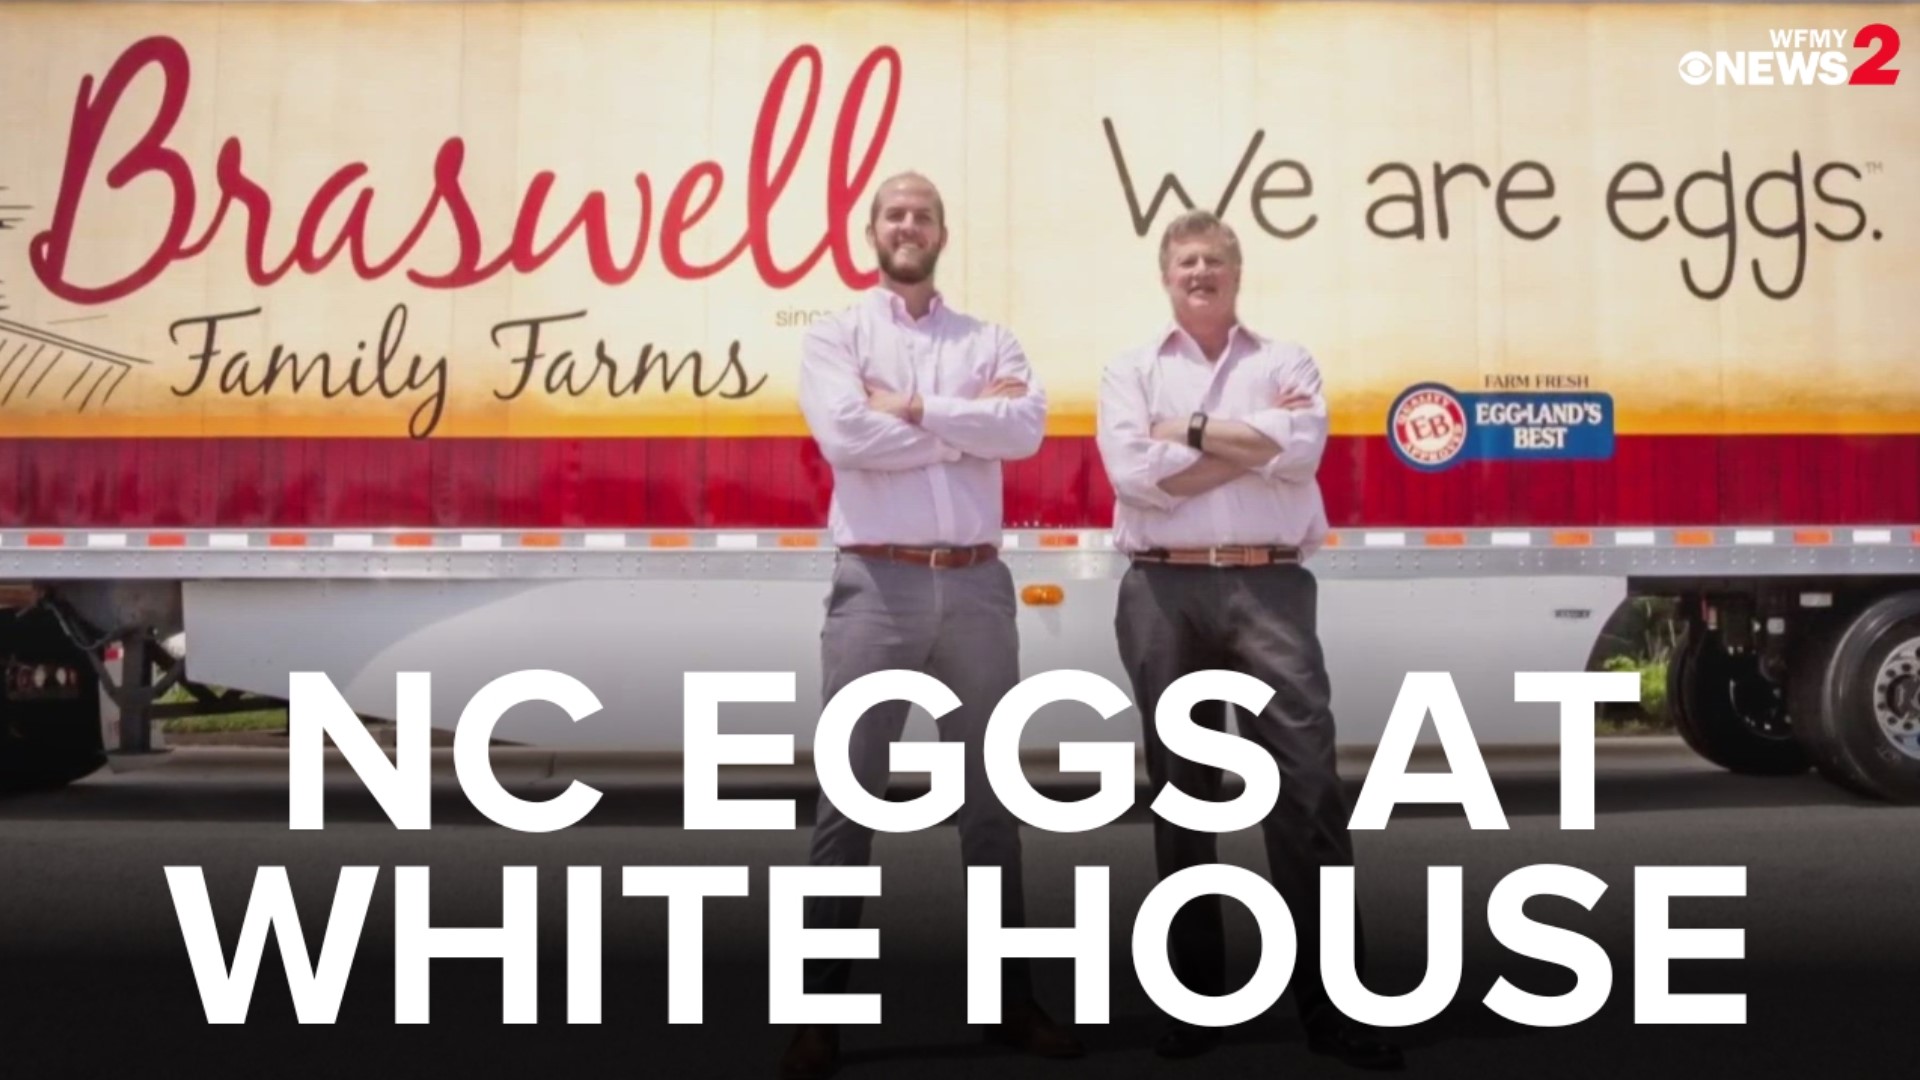 The big day for the Easter Bunny on the White House lawns is all thanks to North Carolina chickens.